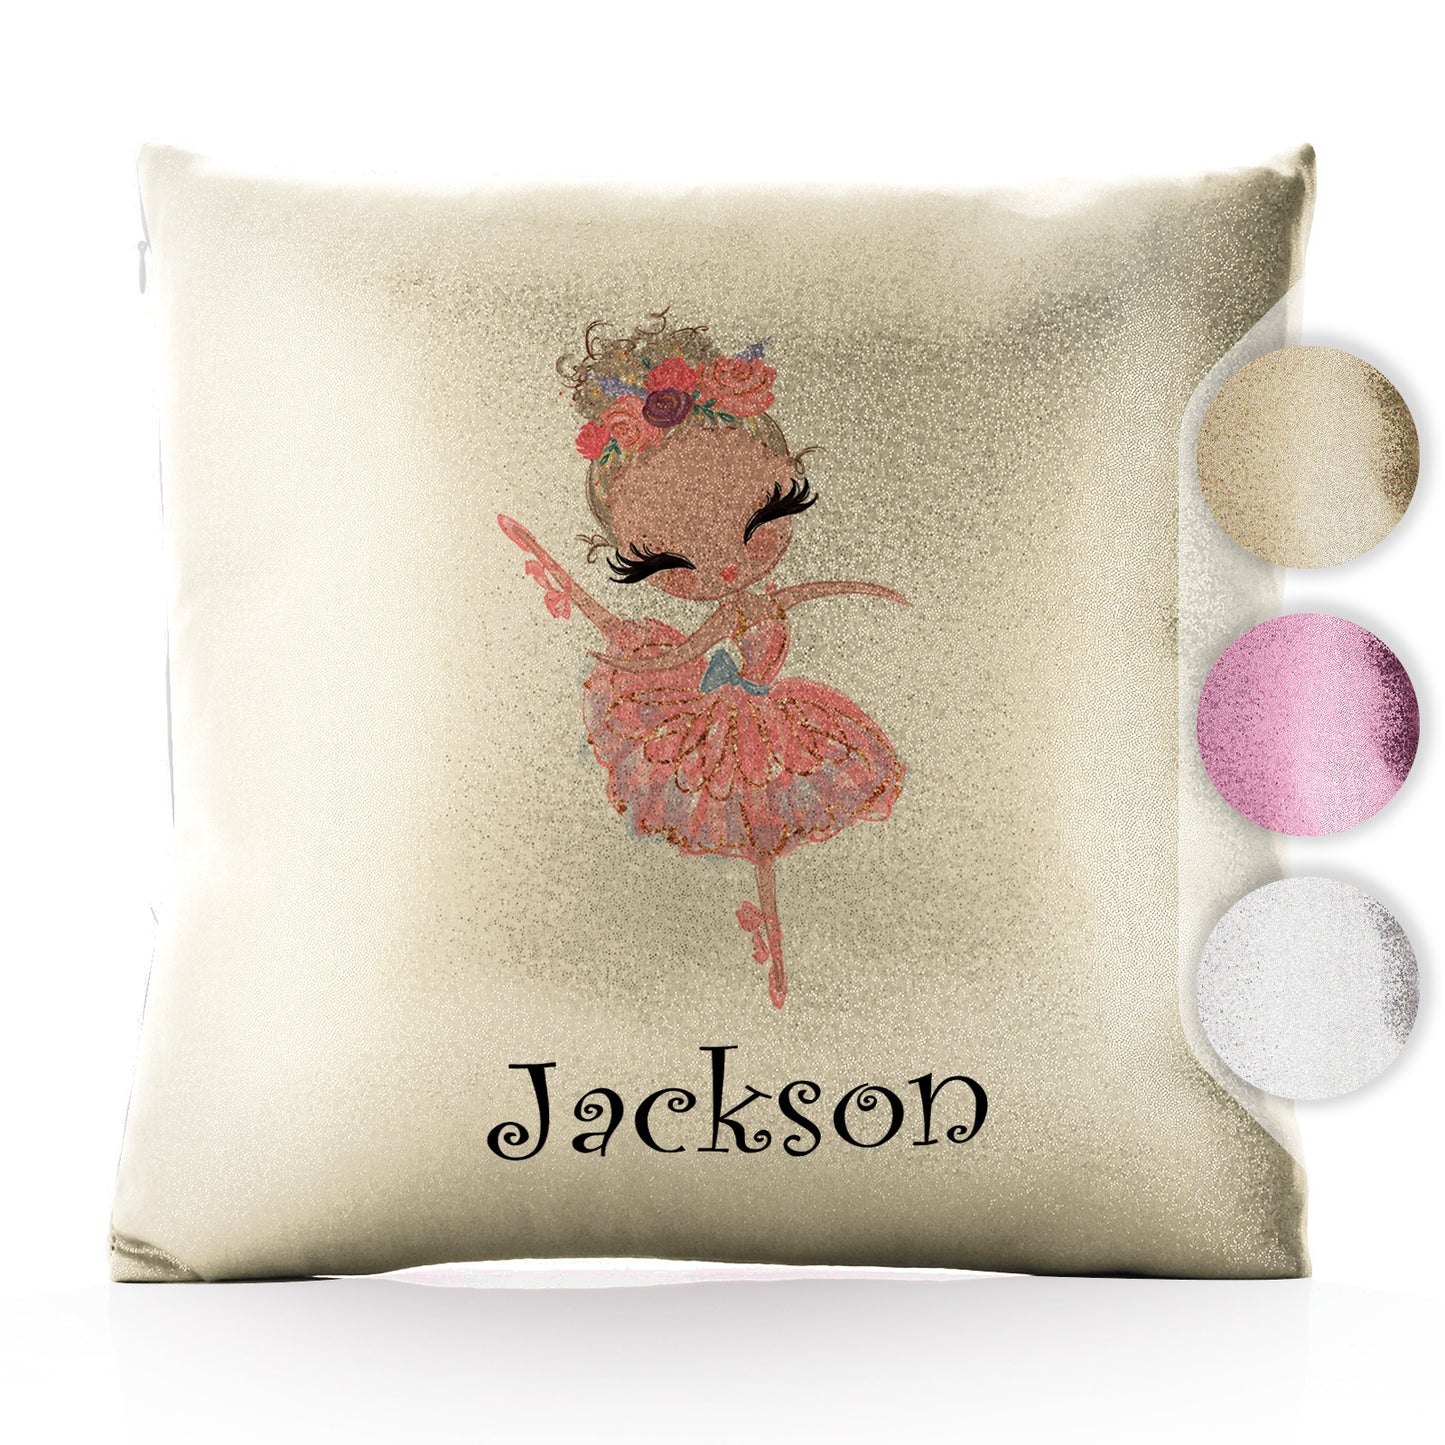 Personalised Glitter Cushion with Cute Text and Blonde Hair Pink Dress Ballerina